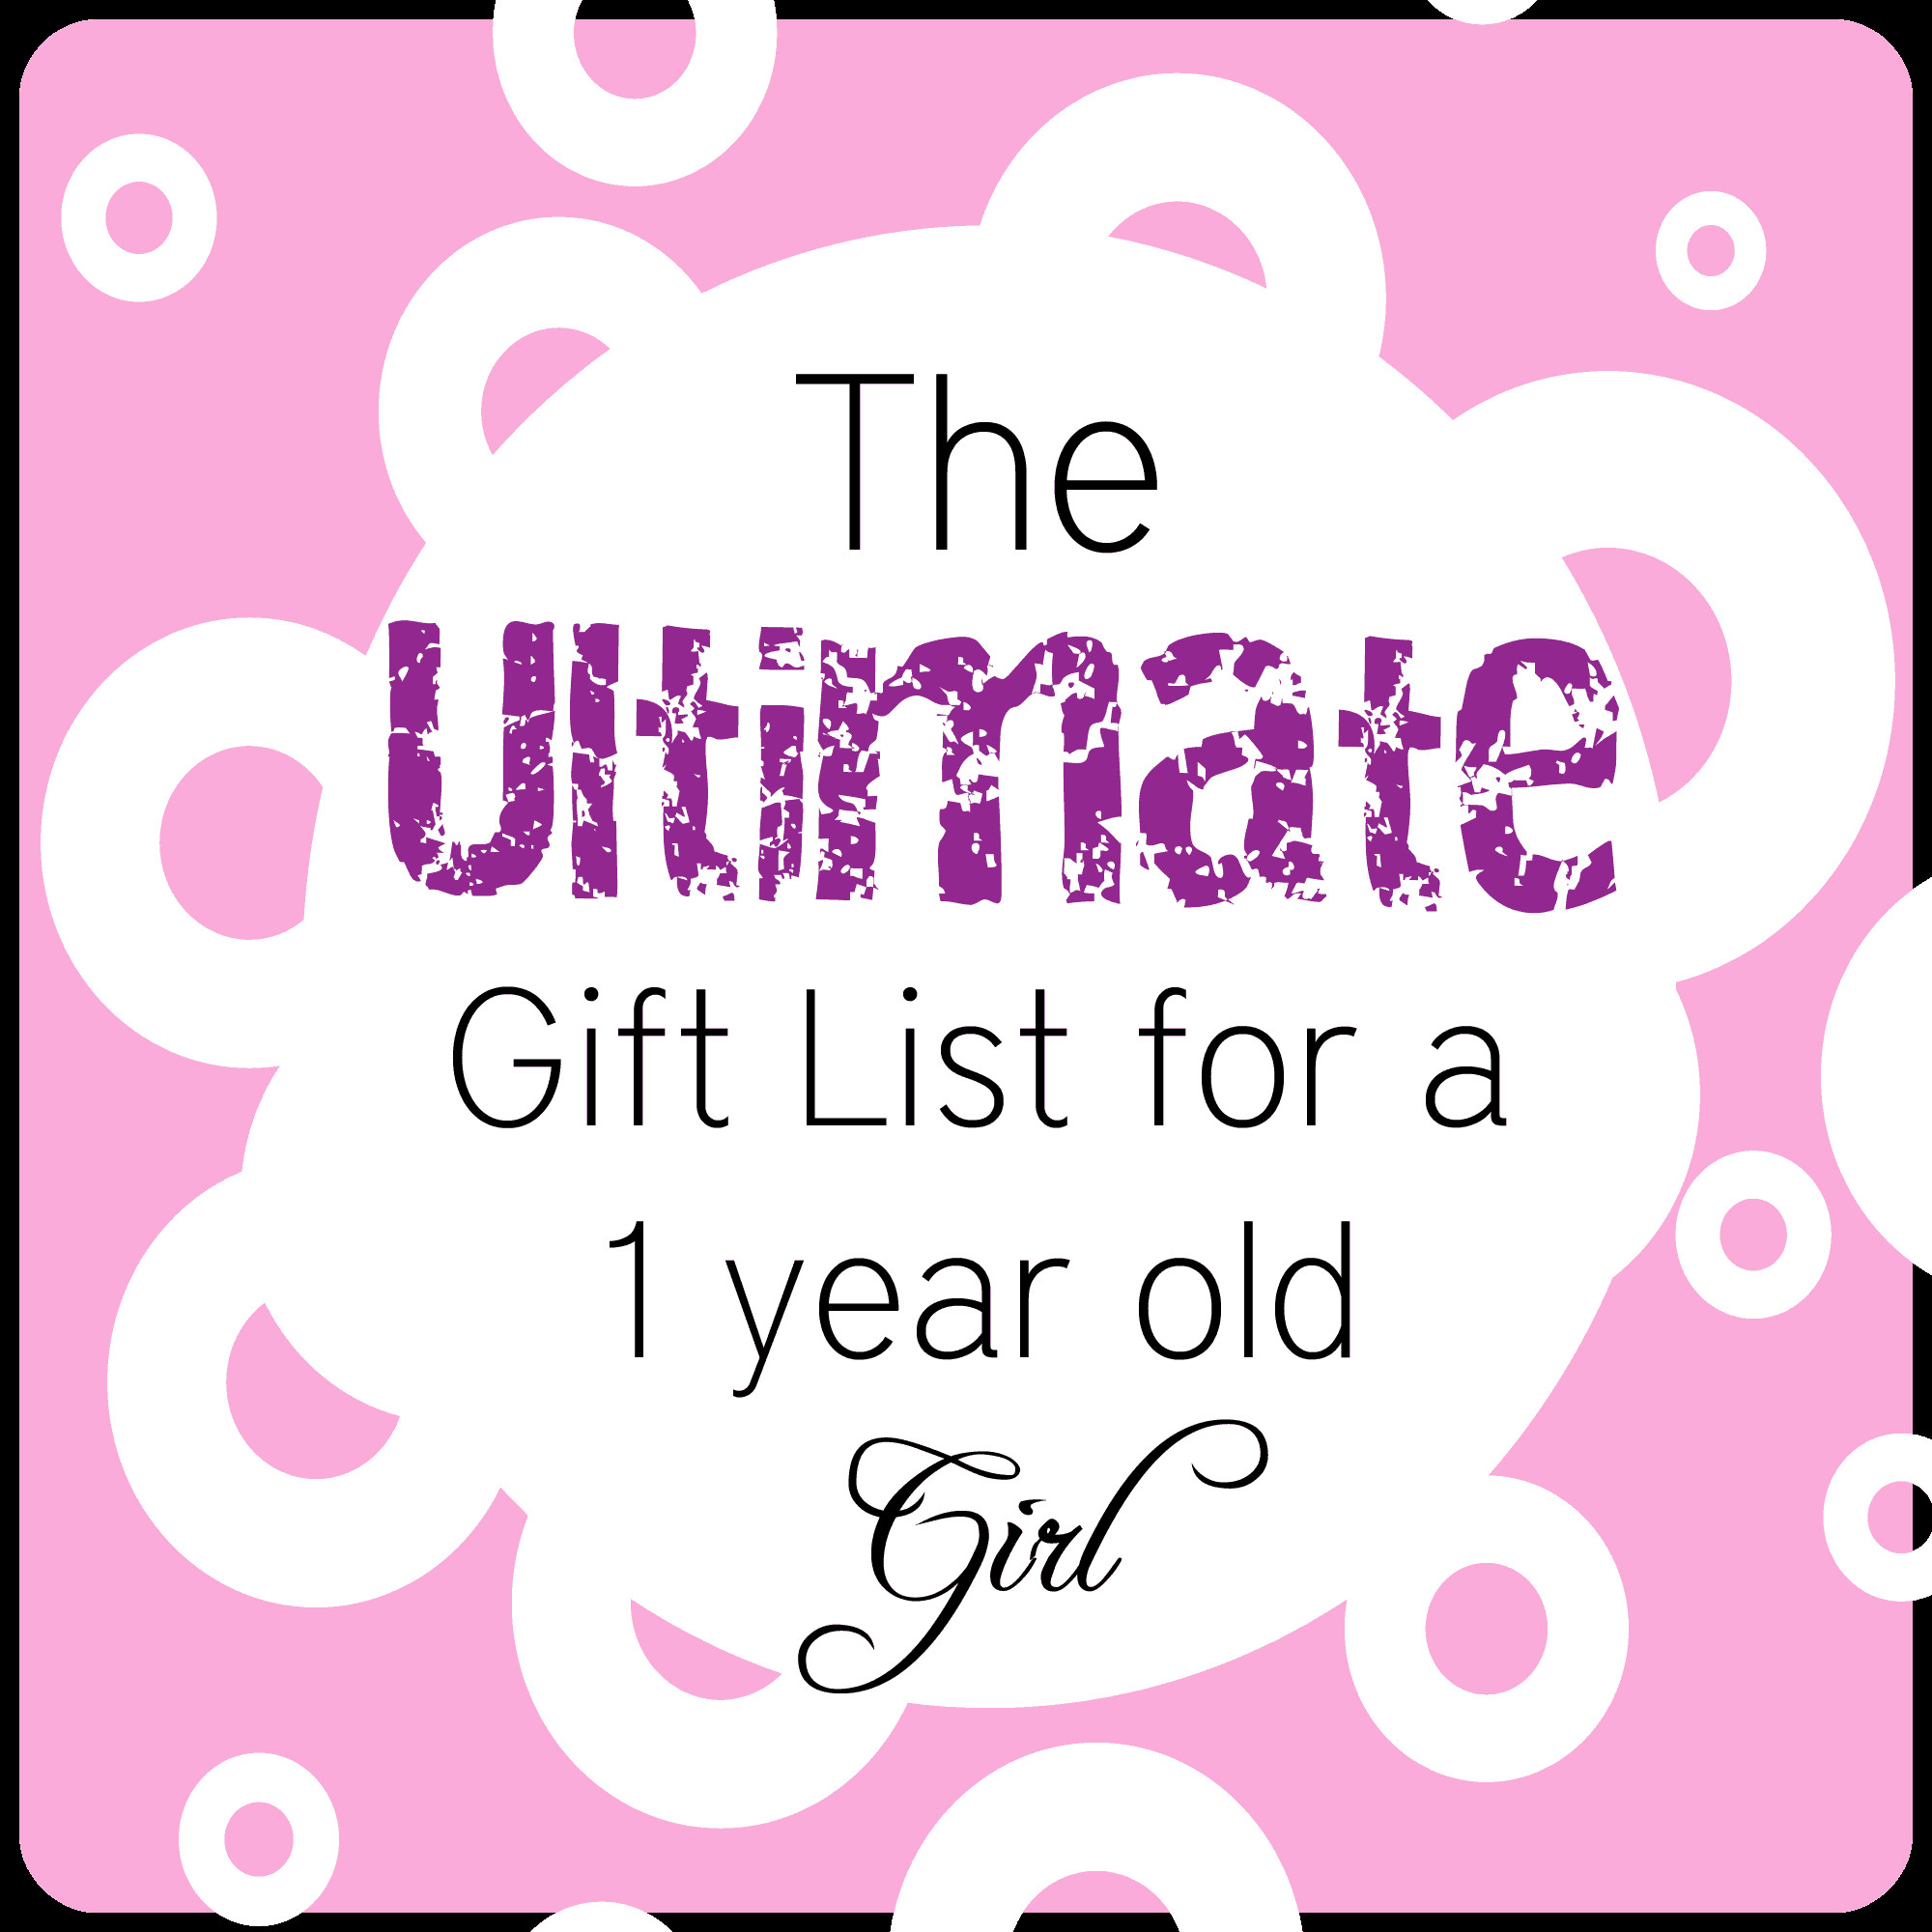 1 Yr Old Girl Birthday Gift Ideas
 BEST Gifts for a 1 Year Old Girl • The Pinning Mama